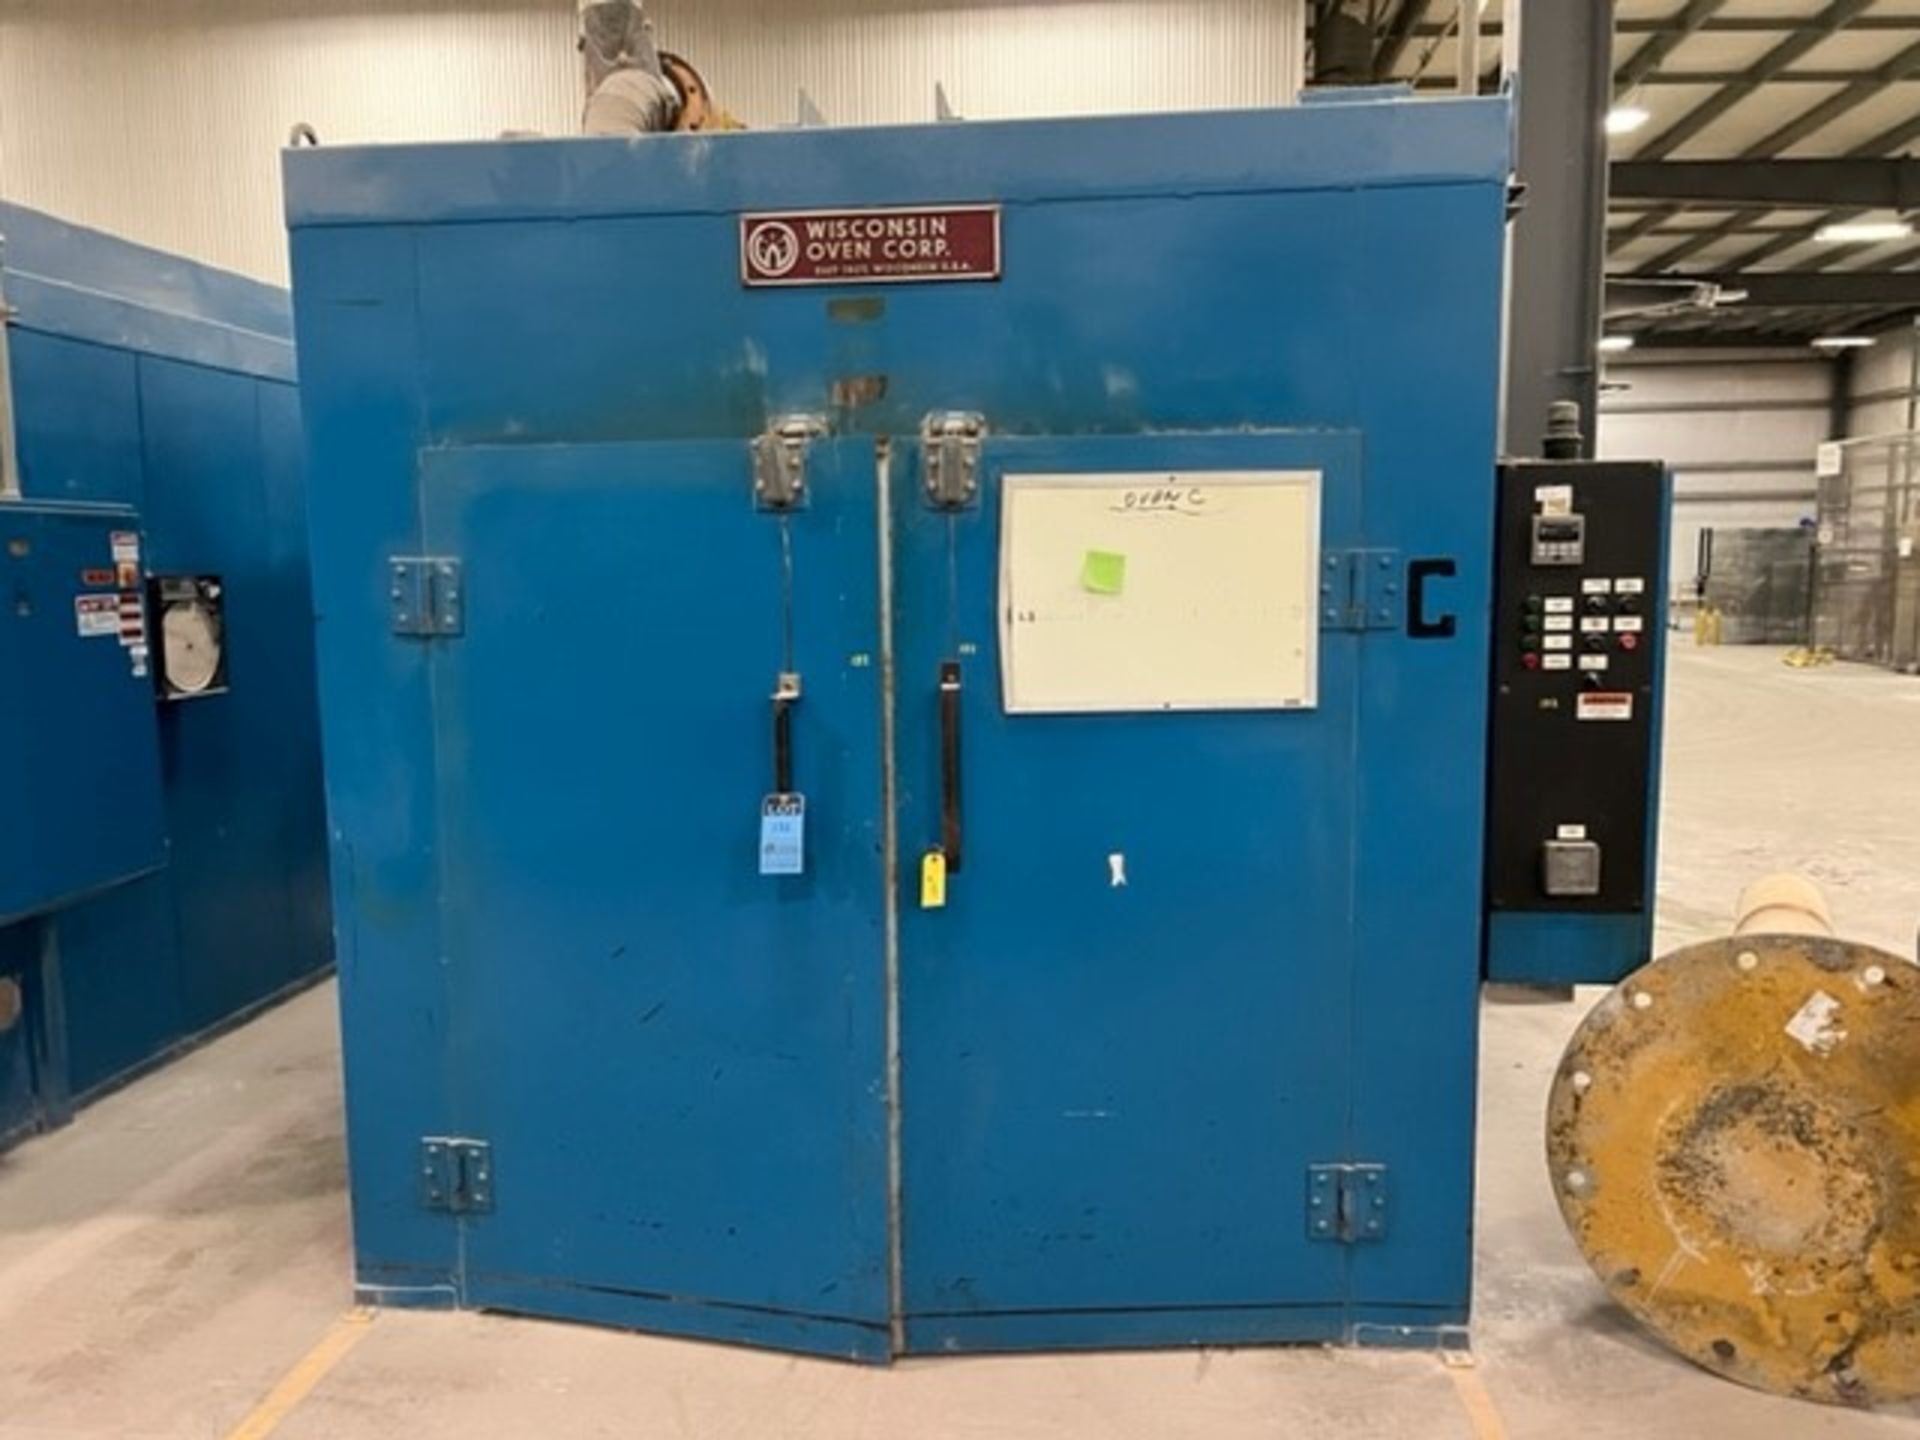 6' X 10' X 6' WISCONSIN OVEN MODEL SWN-610-6E ELECTRIC BATCH OVEN; S/N 112600805, 500 DEGREE, - Image 2 of 14